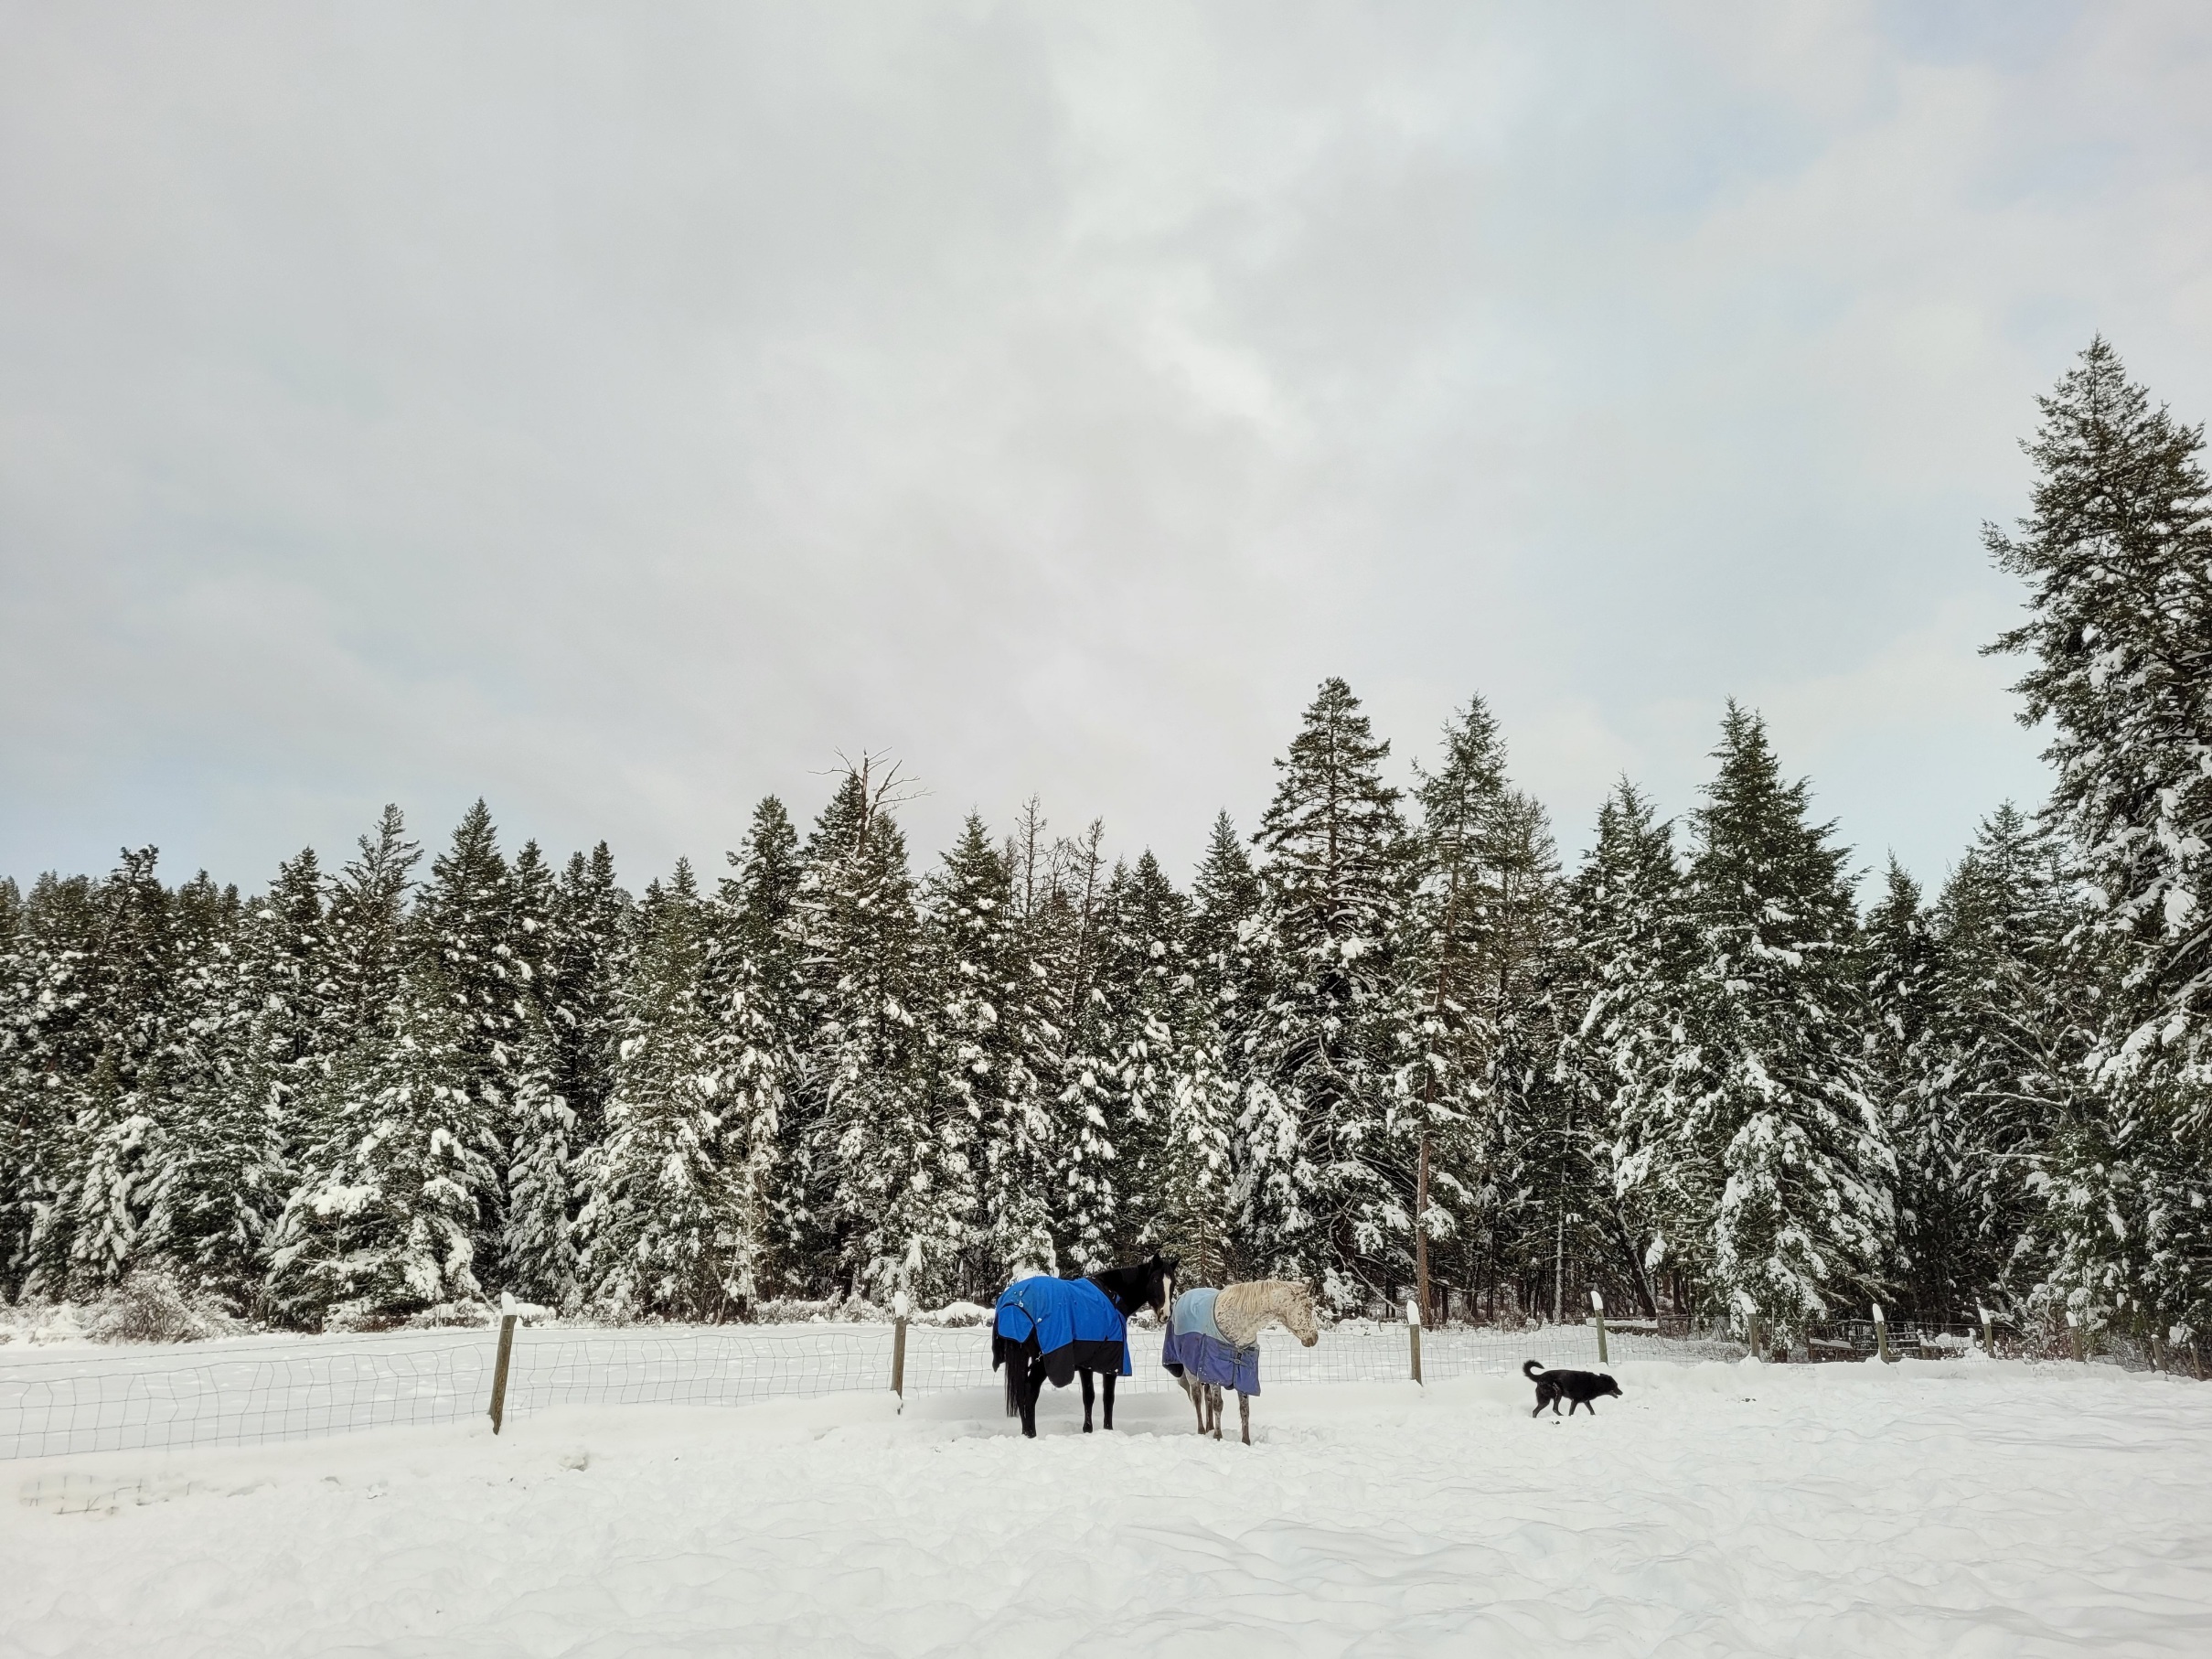 photo of horses in a snowy field, with a black dog